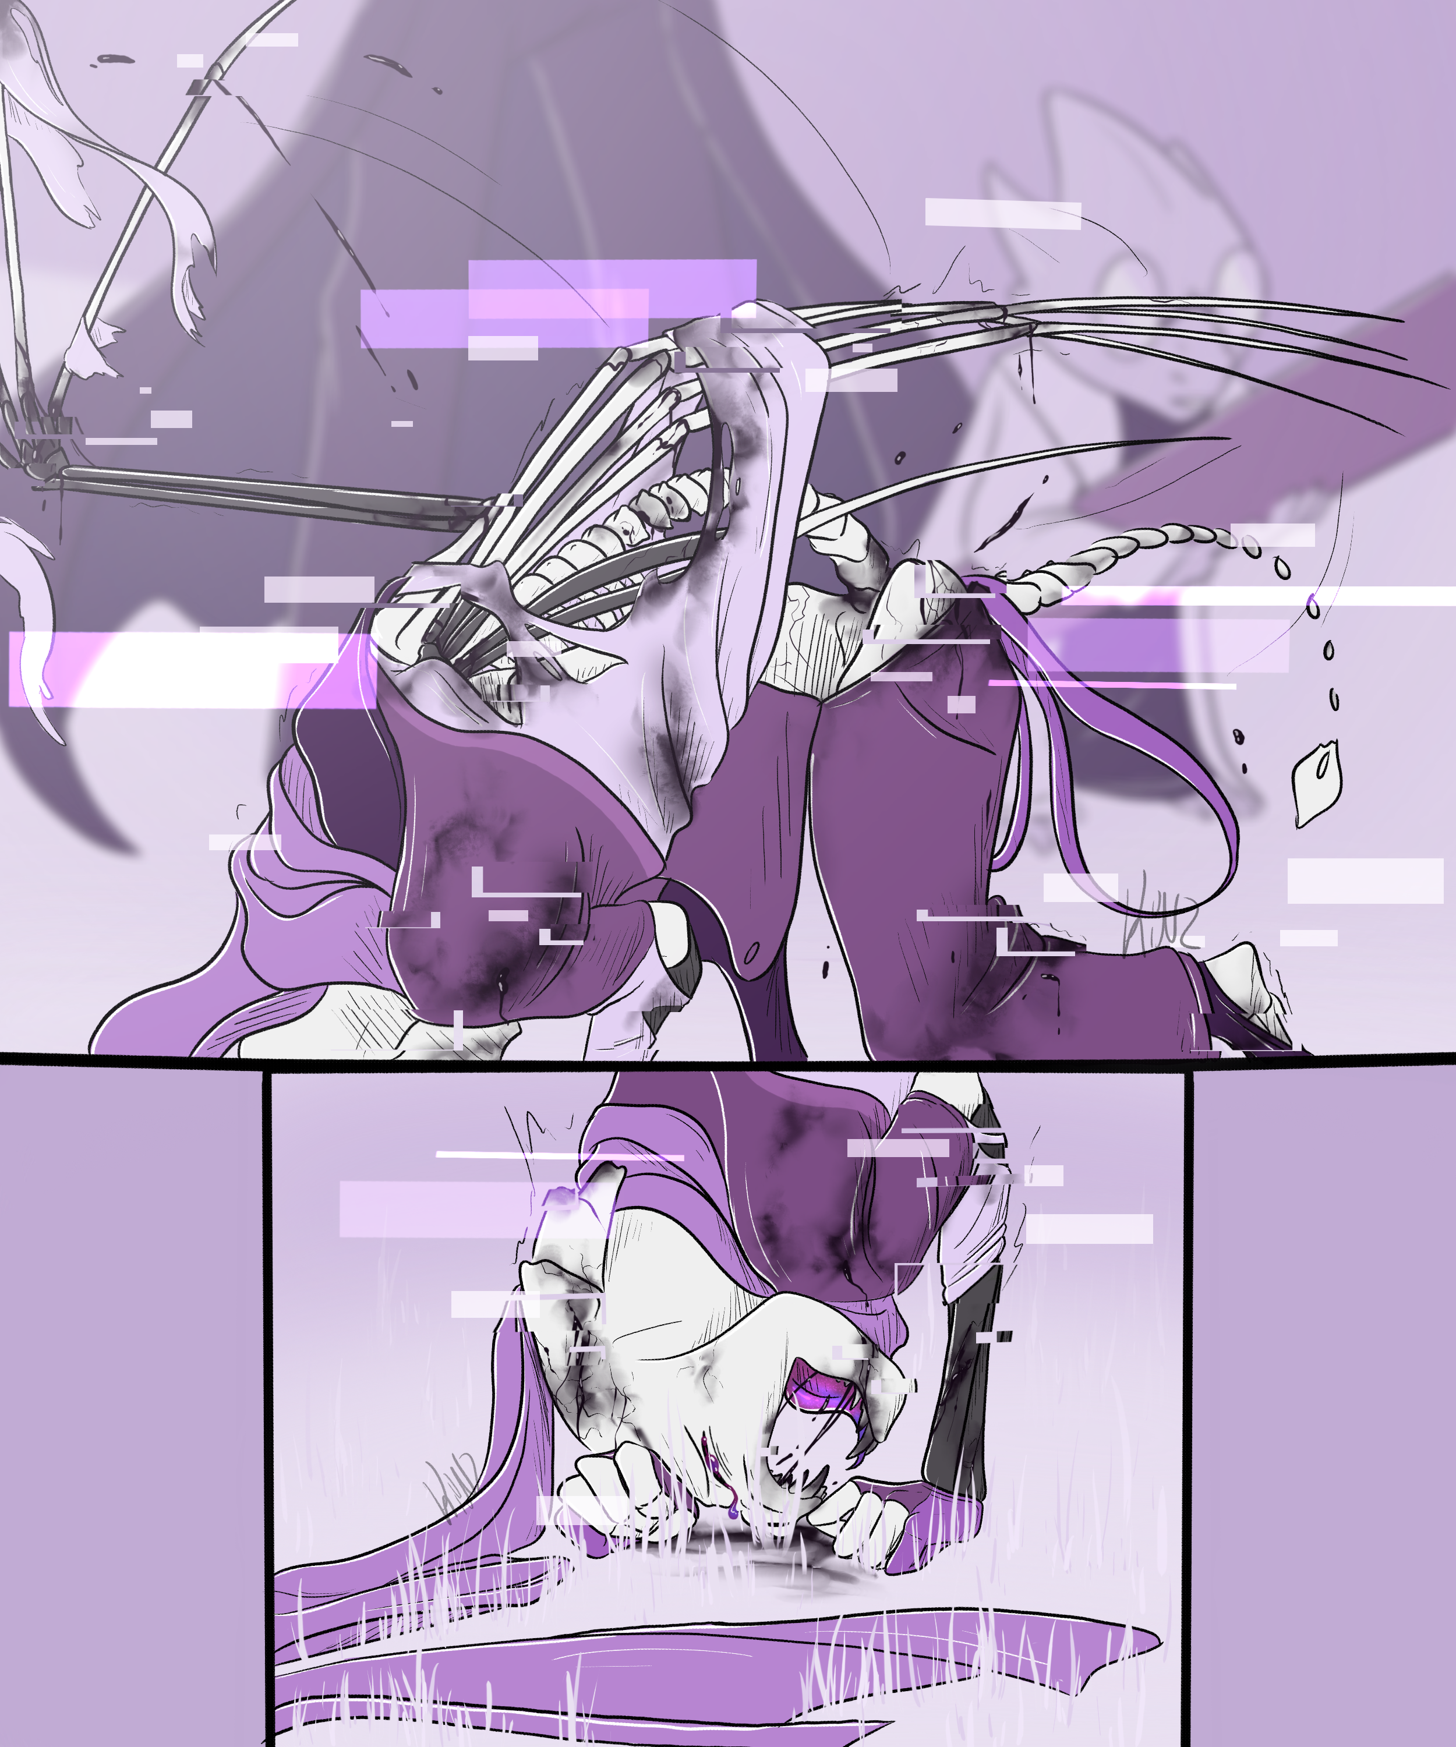 Ink in pain as purple glitches ripple over his body, newly formed wings tearing his shirt and dark ink staining his clothes and bones. The background shows the blurry forms of XGaster and Alphys. Bottom panel is a close up of Ink's terrified face, fangs and horns slowly forming and arms growing unnaturally. Purple tears bead up in his eyes.